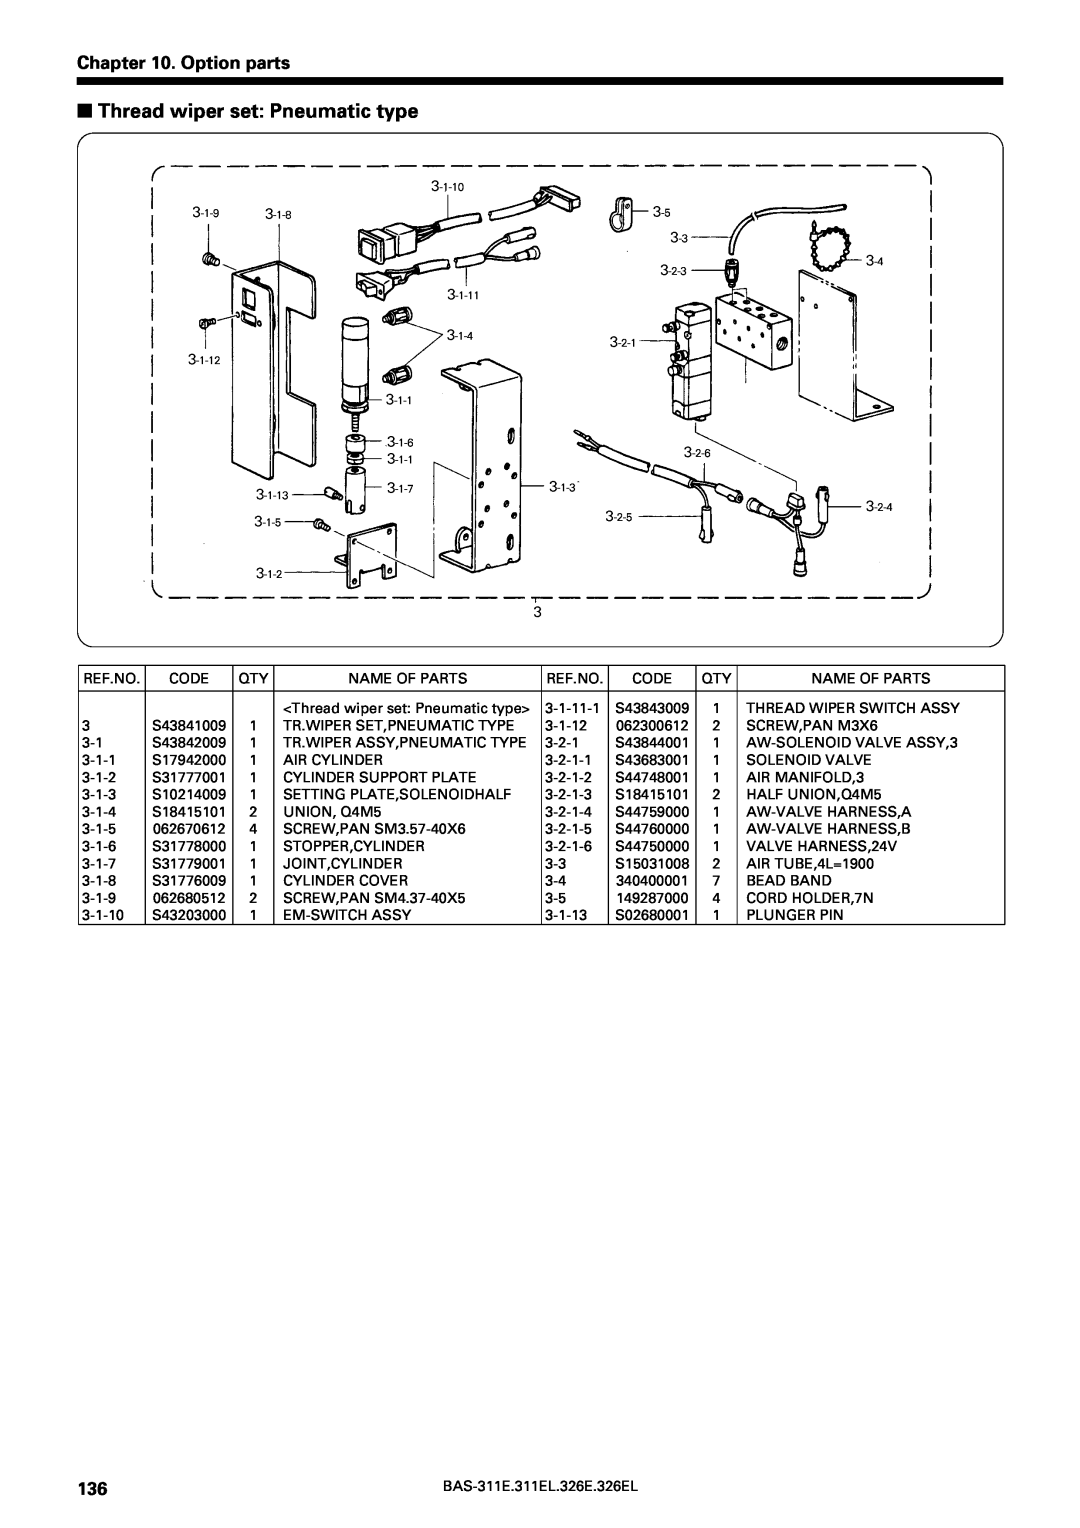 Brother BAS-311E service manual Thread wiper set Pneumatic type, Option parts 